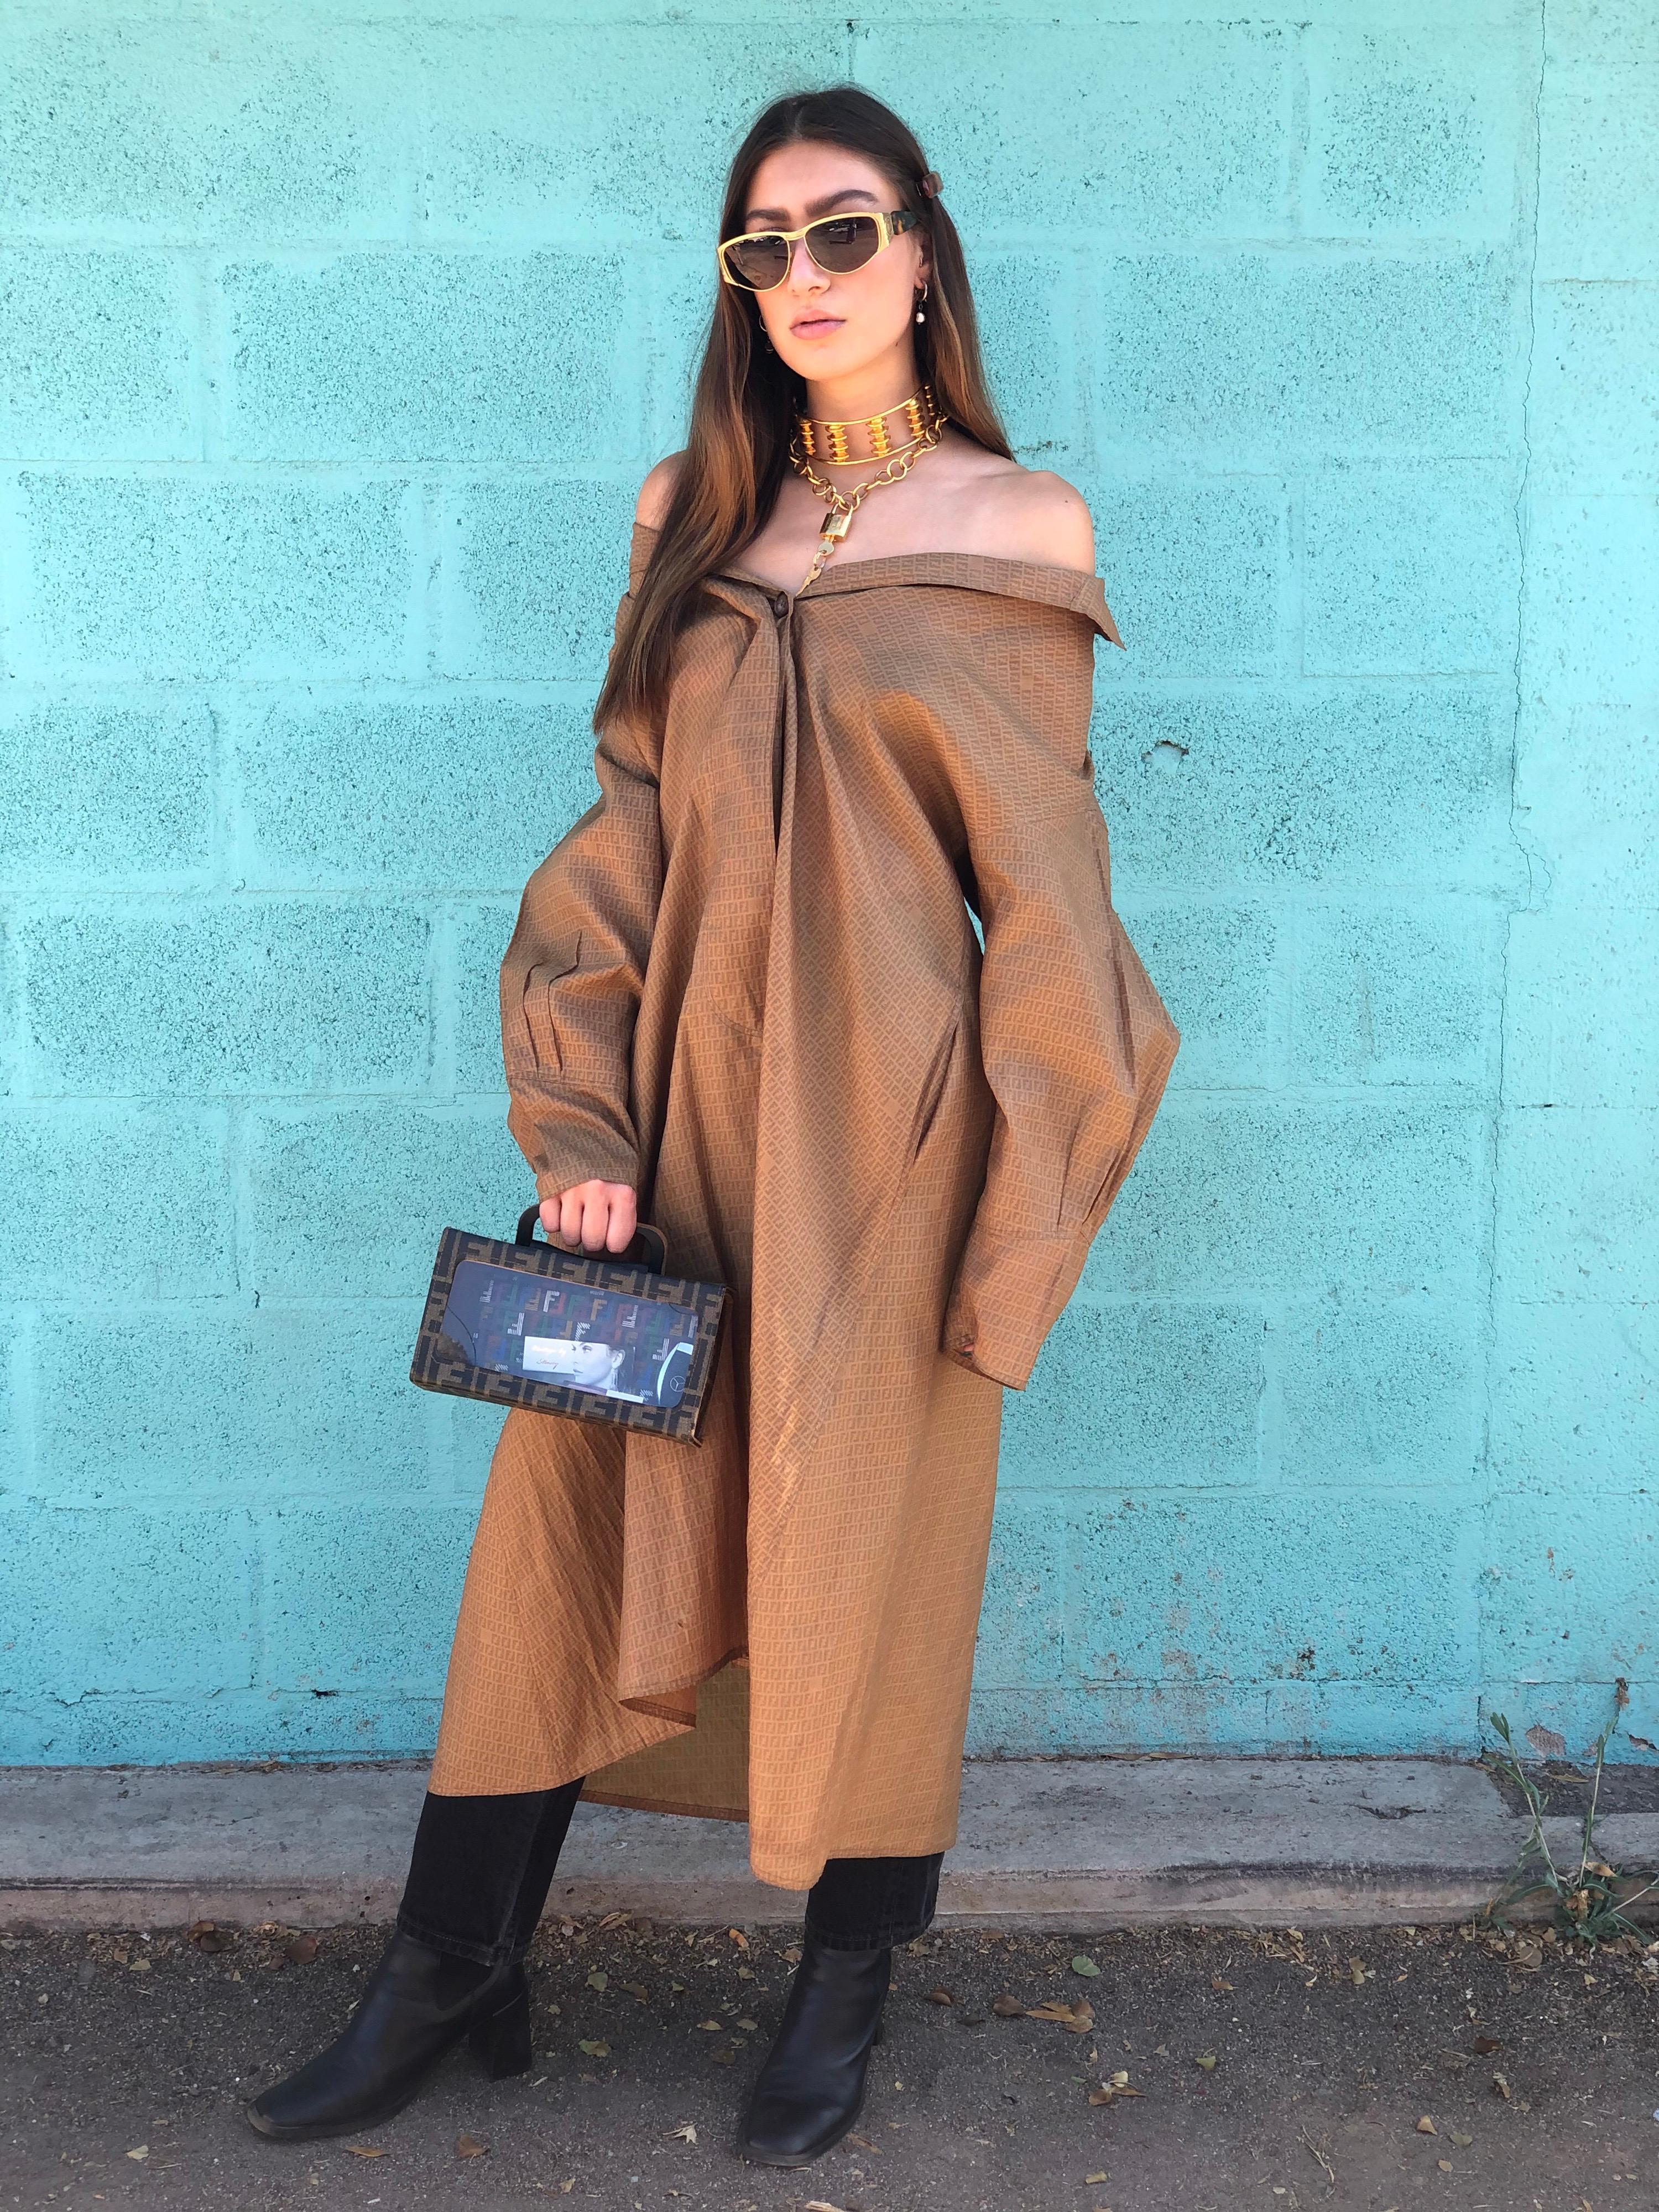 Zoom in and Elevate all your fall/winter looks with this amazing trench! Circa 1980s from Fendi's 365 line, this trench coat is a gorgeous camel color and features the Fendi monogram printed all over with billowy sleeves. Includes large hidden